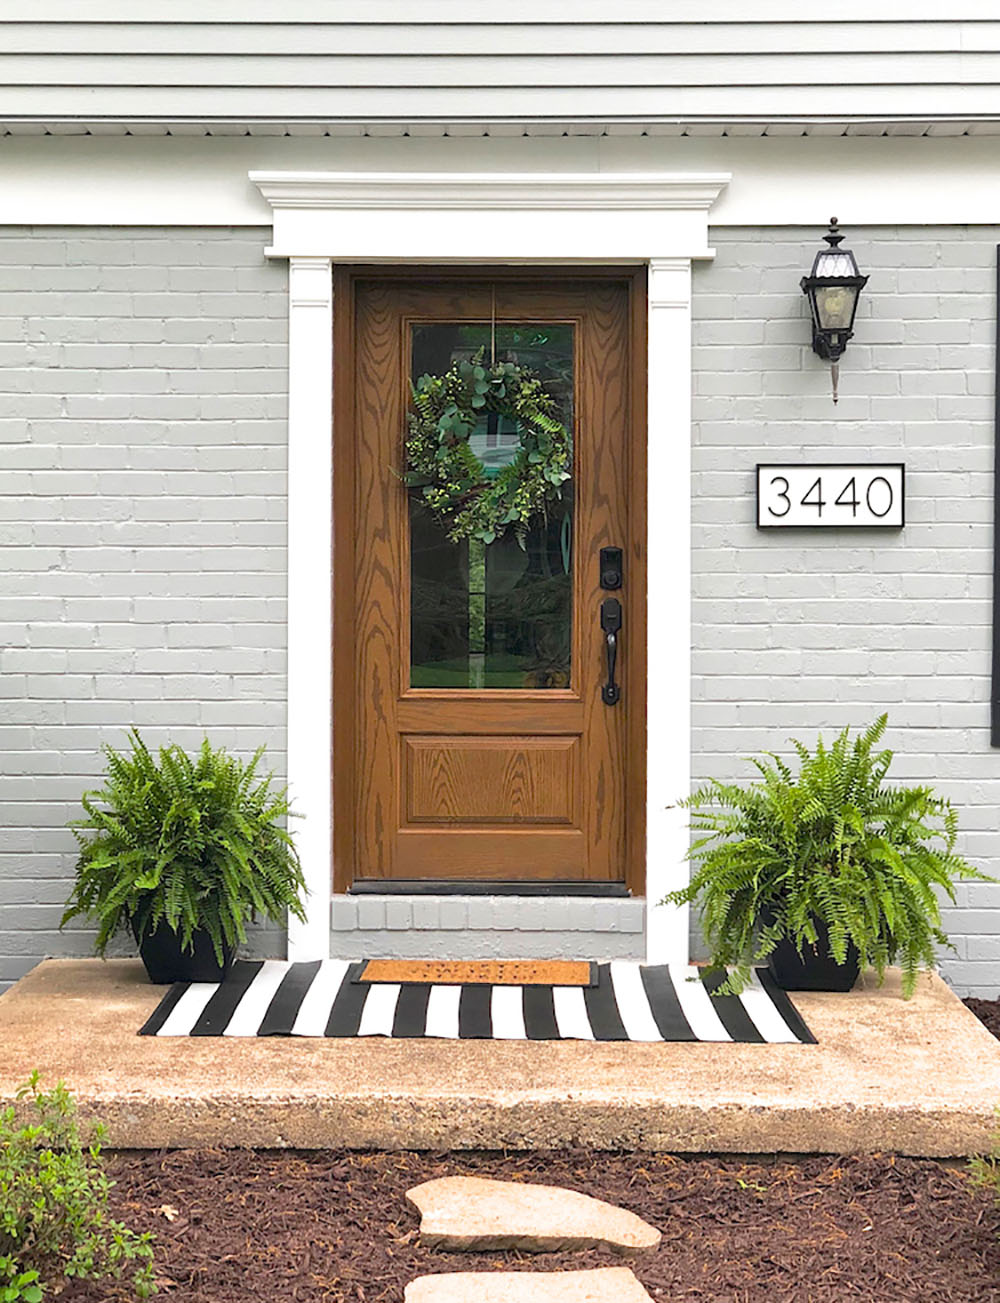 A black and white striped doormat sitting in front of a new front door with new hardware, trim and painted brick.